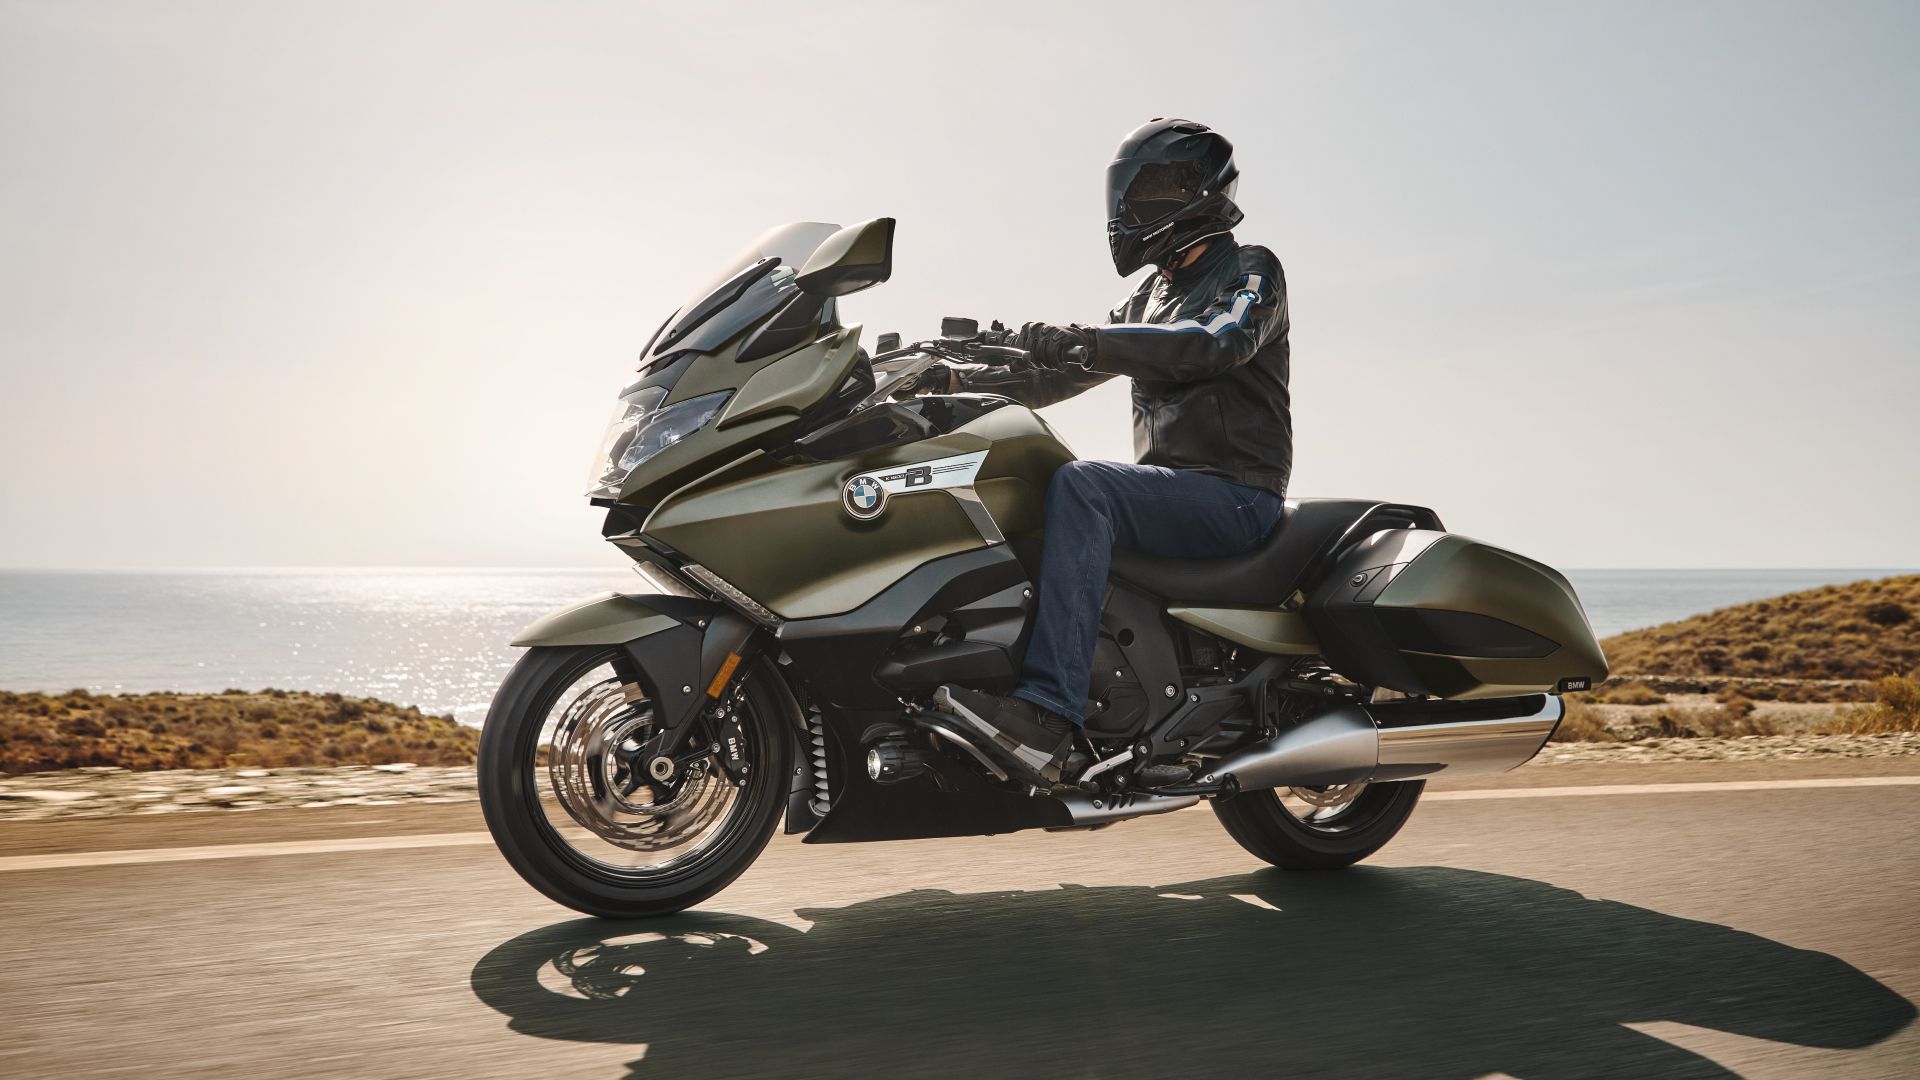 5 Pros And 5 Cons That You Need To Know About The BMW K 1600 GT